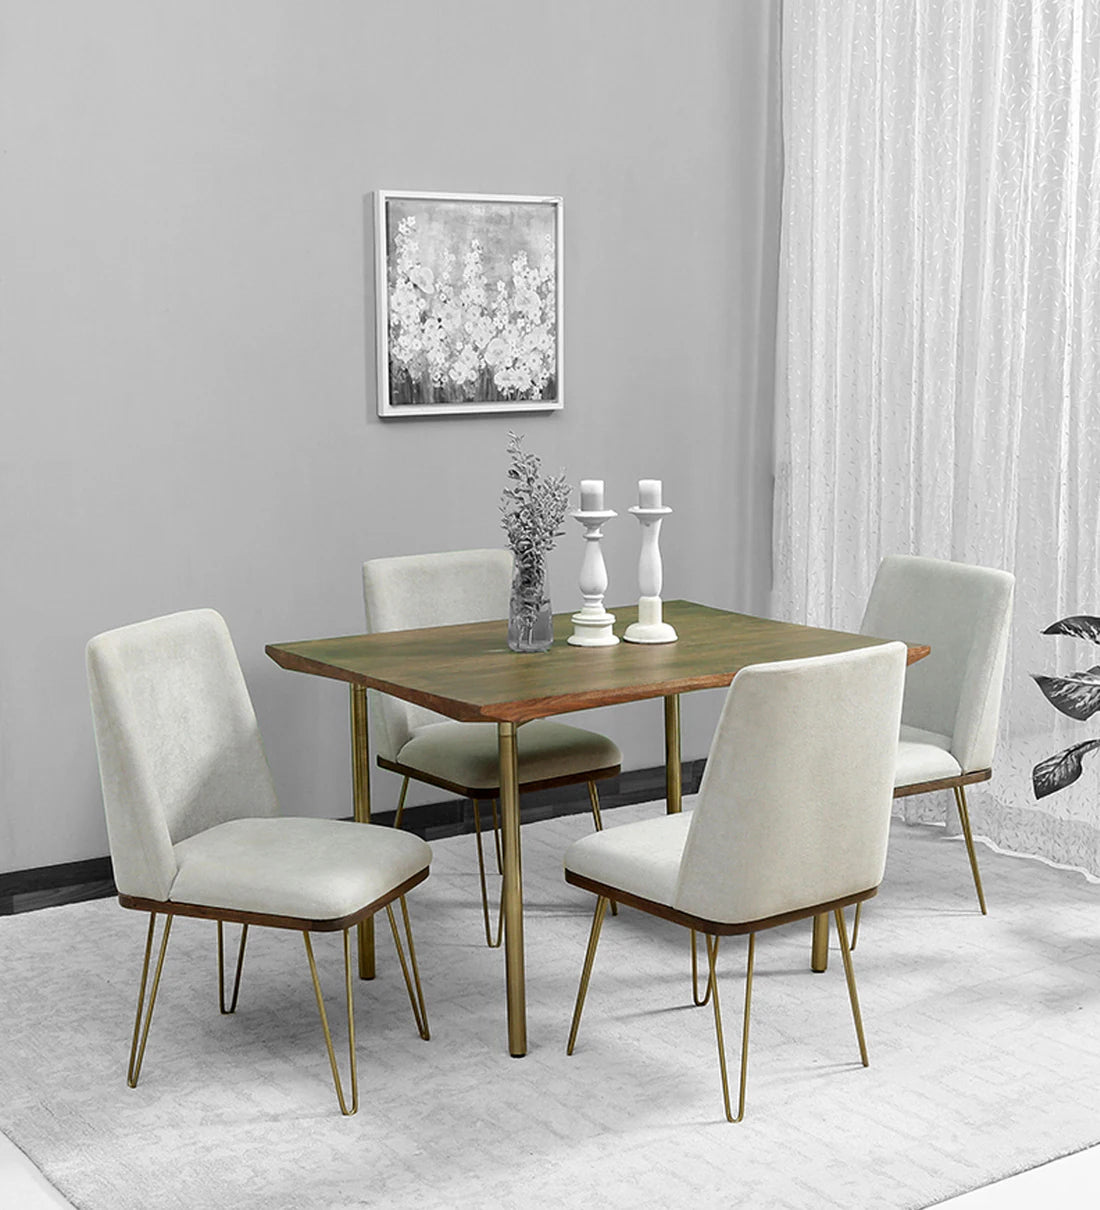 Solid Wood 4 Seater Dining Set in American Walnut Finish